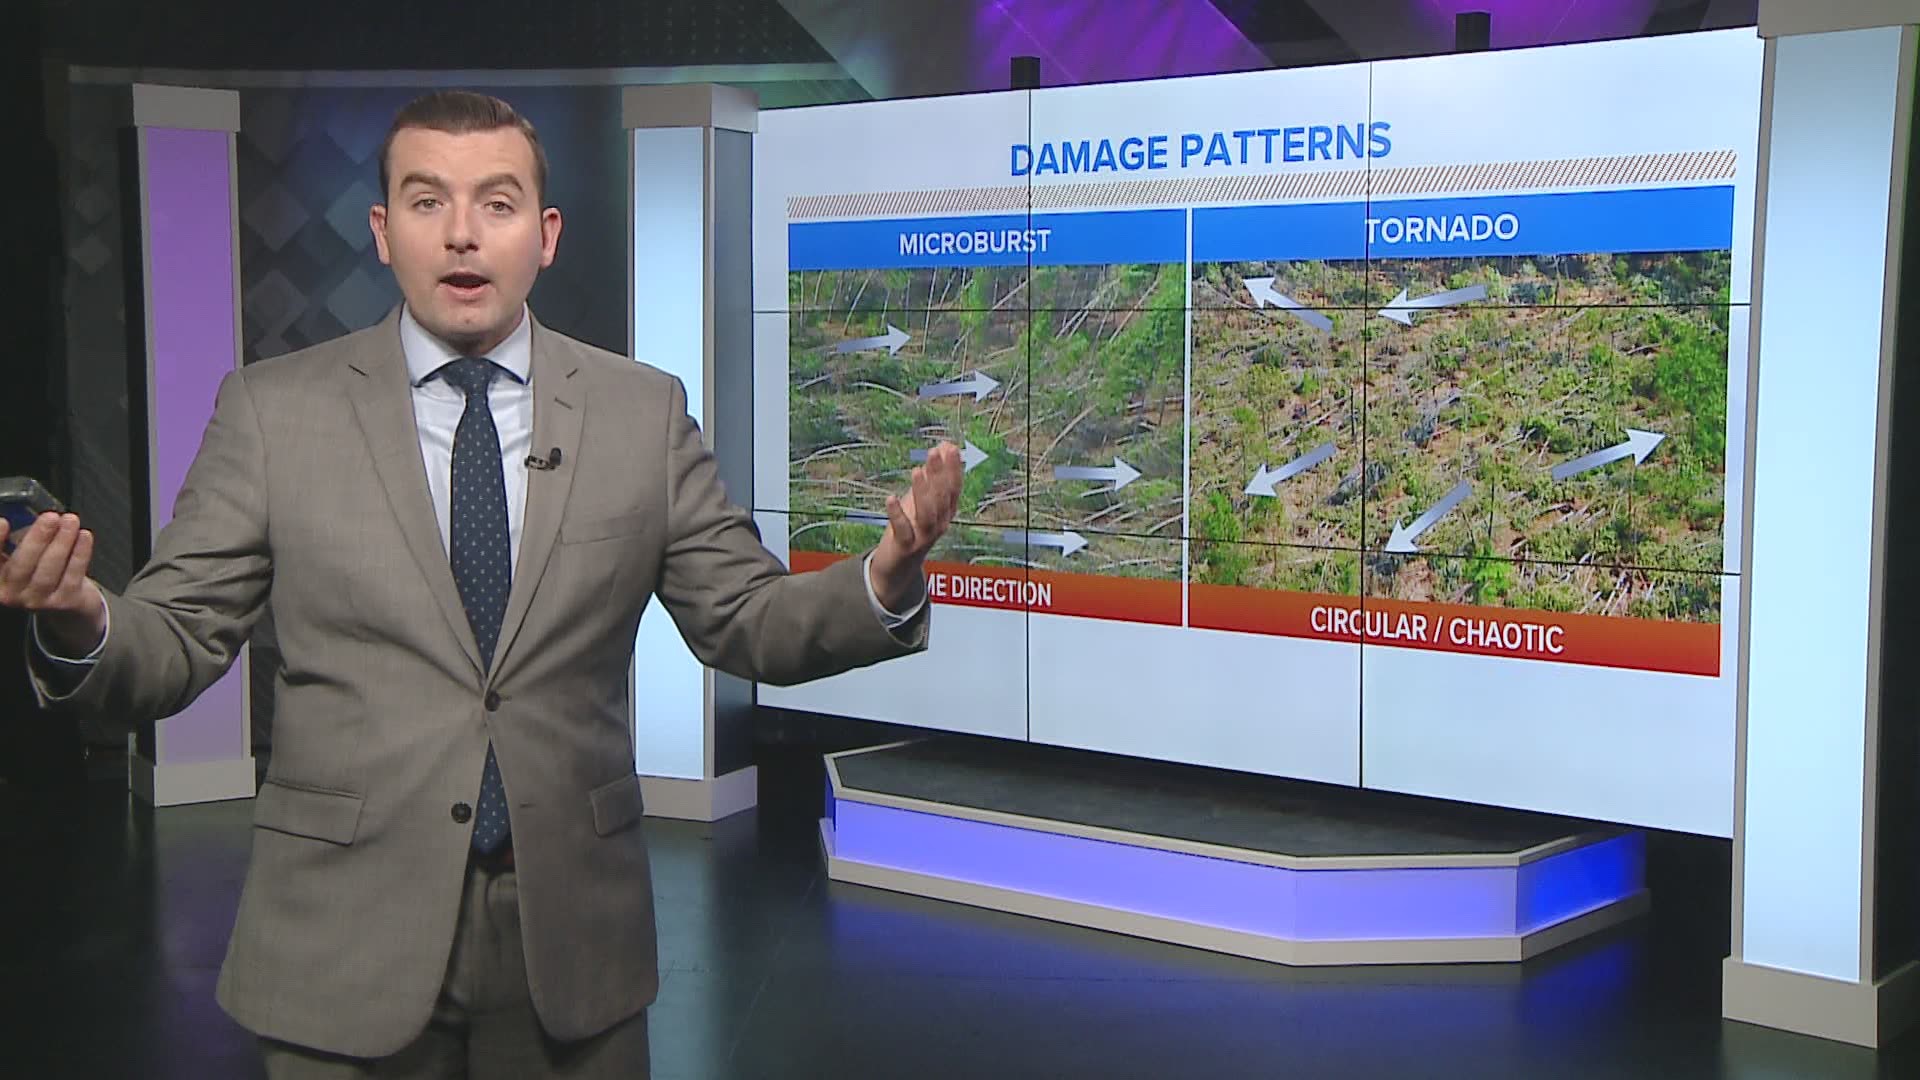 There have been several tornado warnings in Maine the last few days, and so far no confirmed touchdowns.